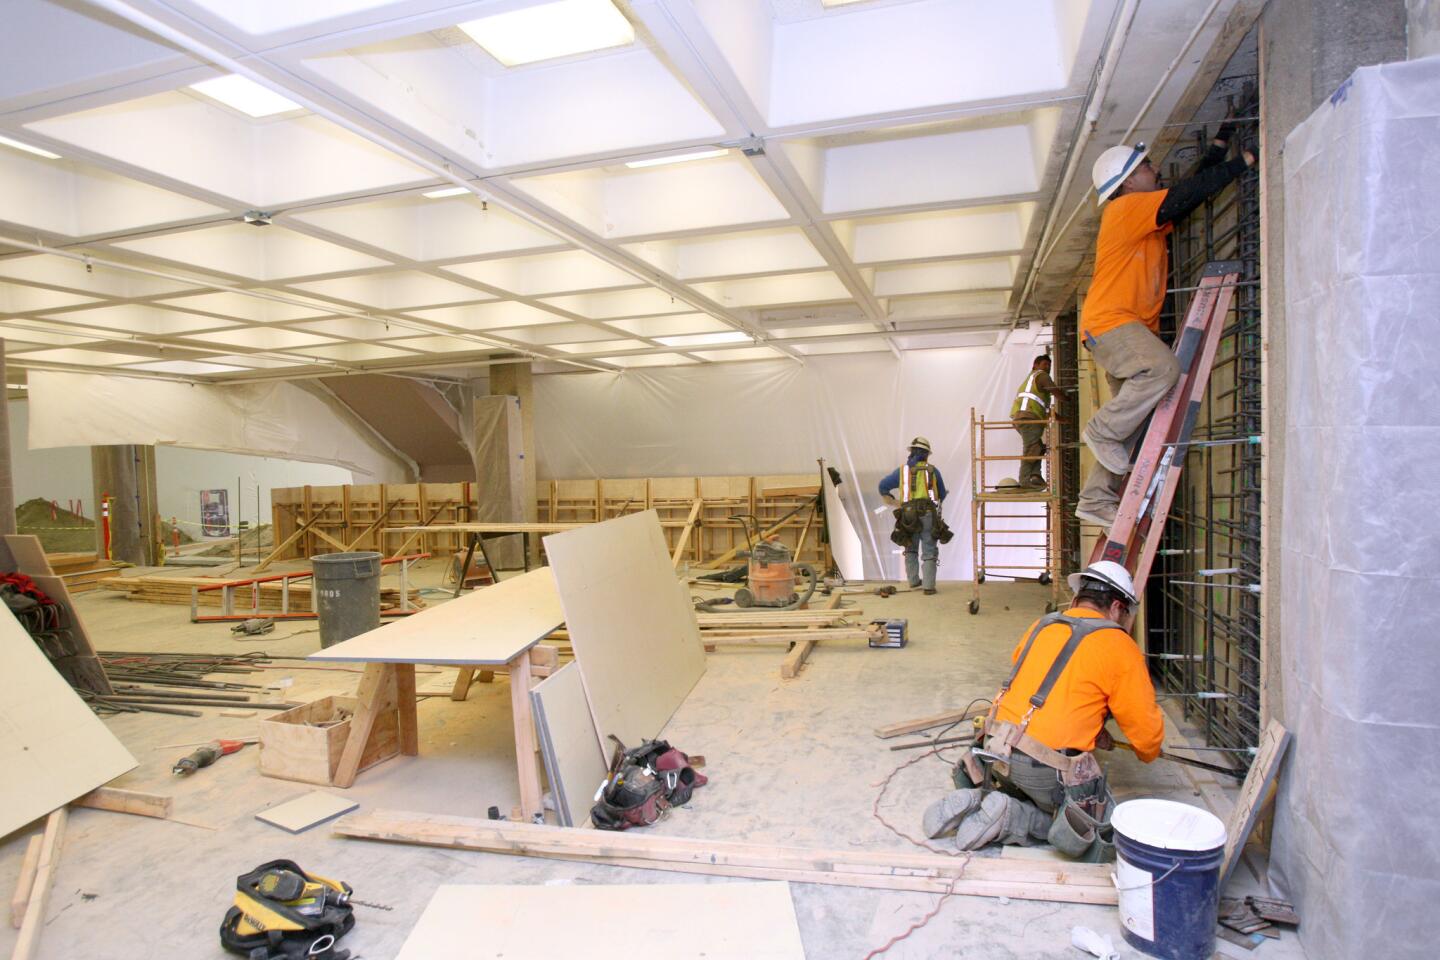 Photo Gallery: Central library renovations continue on track